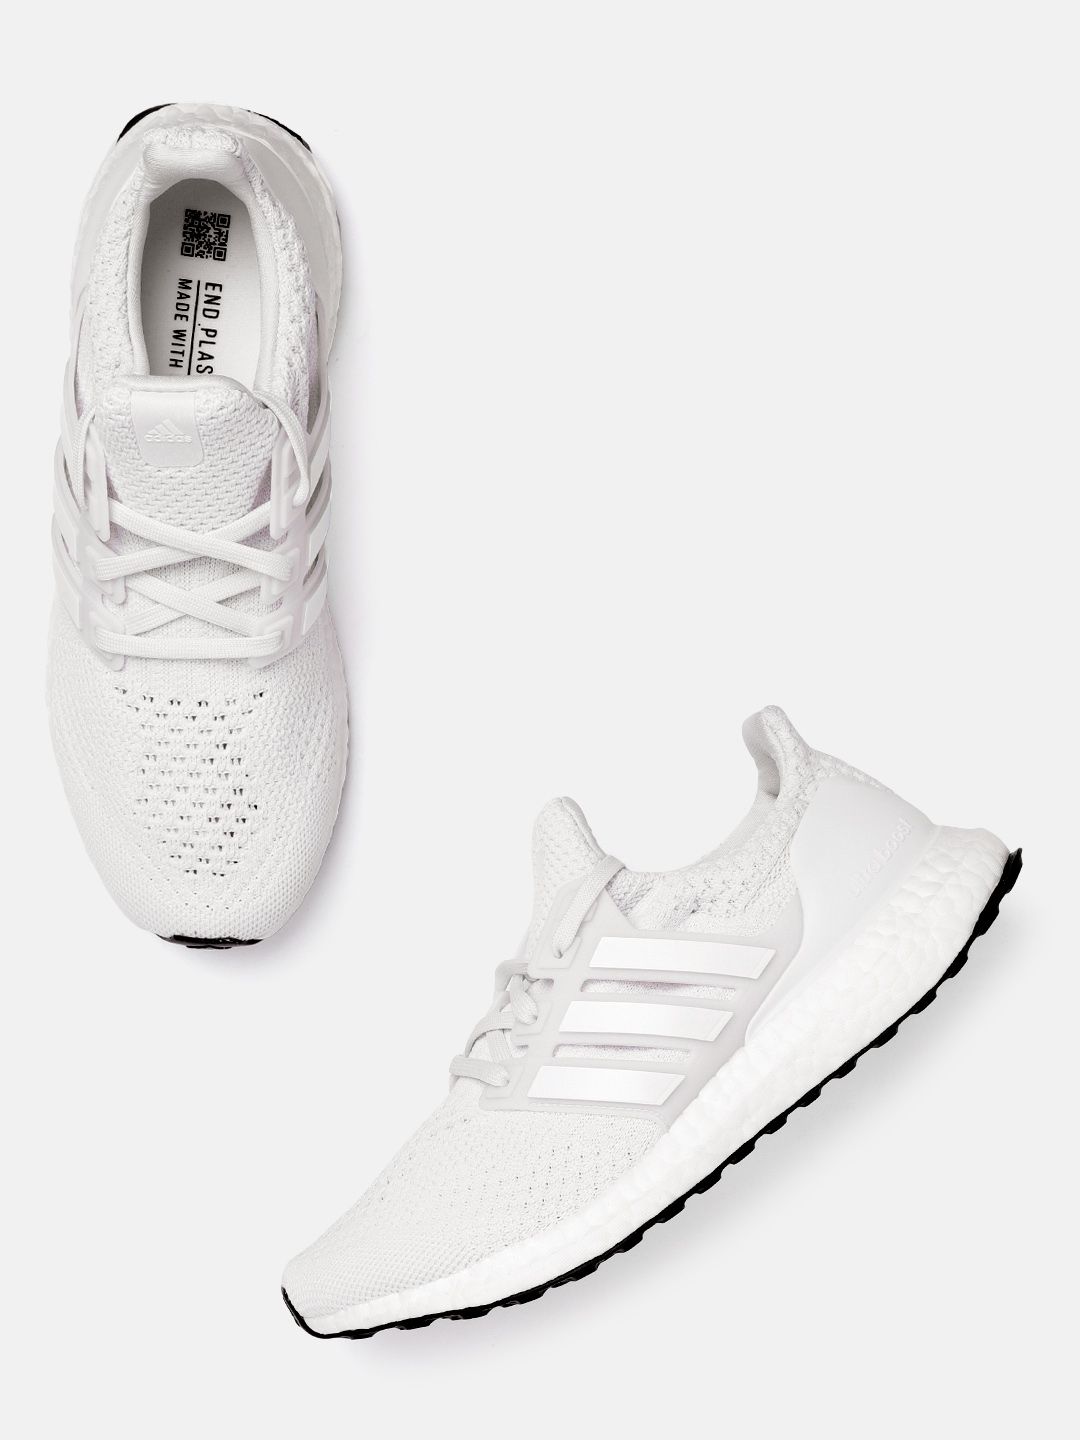 ADIDAS Women White Woven Design Boost Midsole Ultraboost 5.0 DNA Running Shoes Price in India